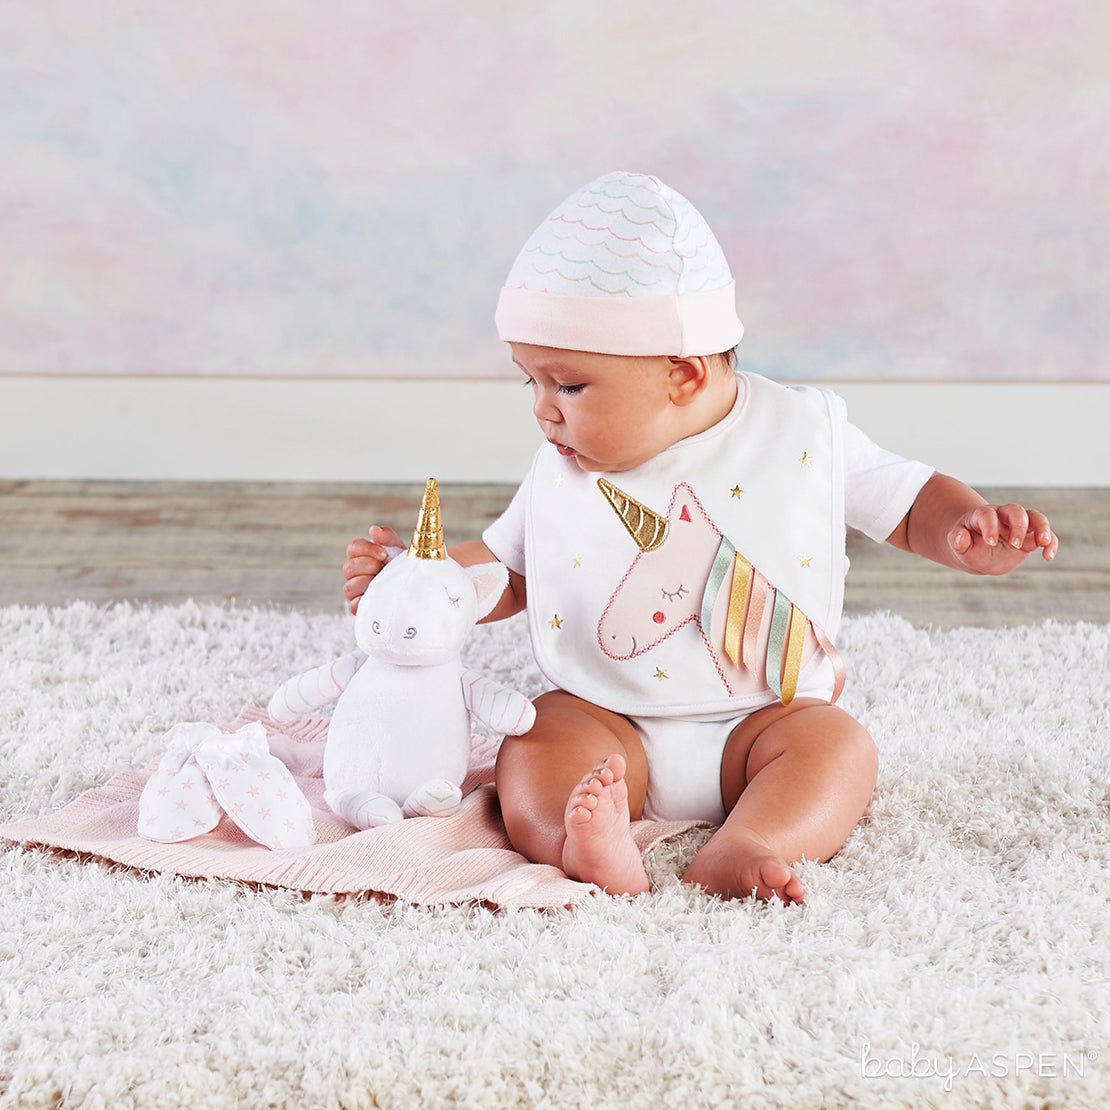 Simply Enchanted Unicorn 5-Piece Welcome Home Gift Set | Magical Unicorn Themed Baby Gifts | Baby Aspen